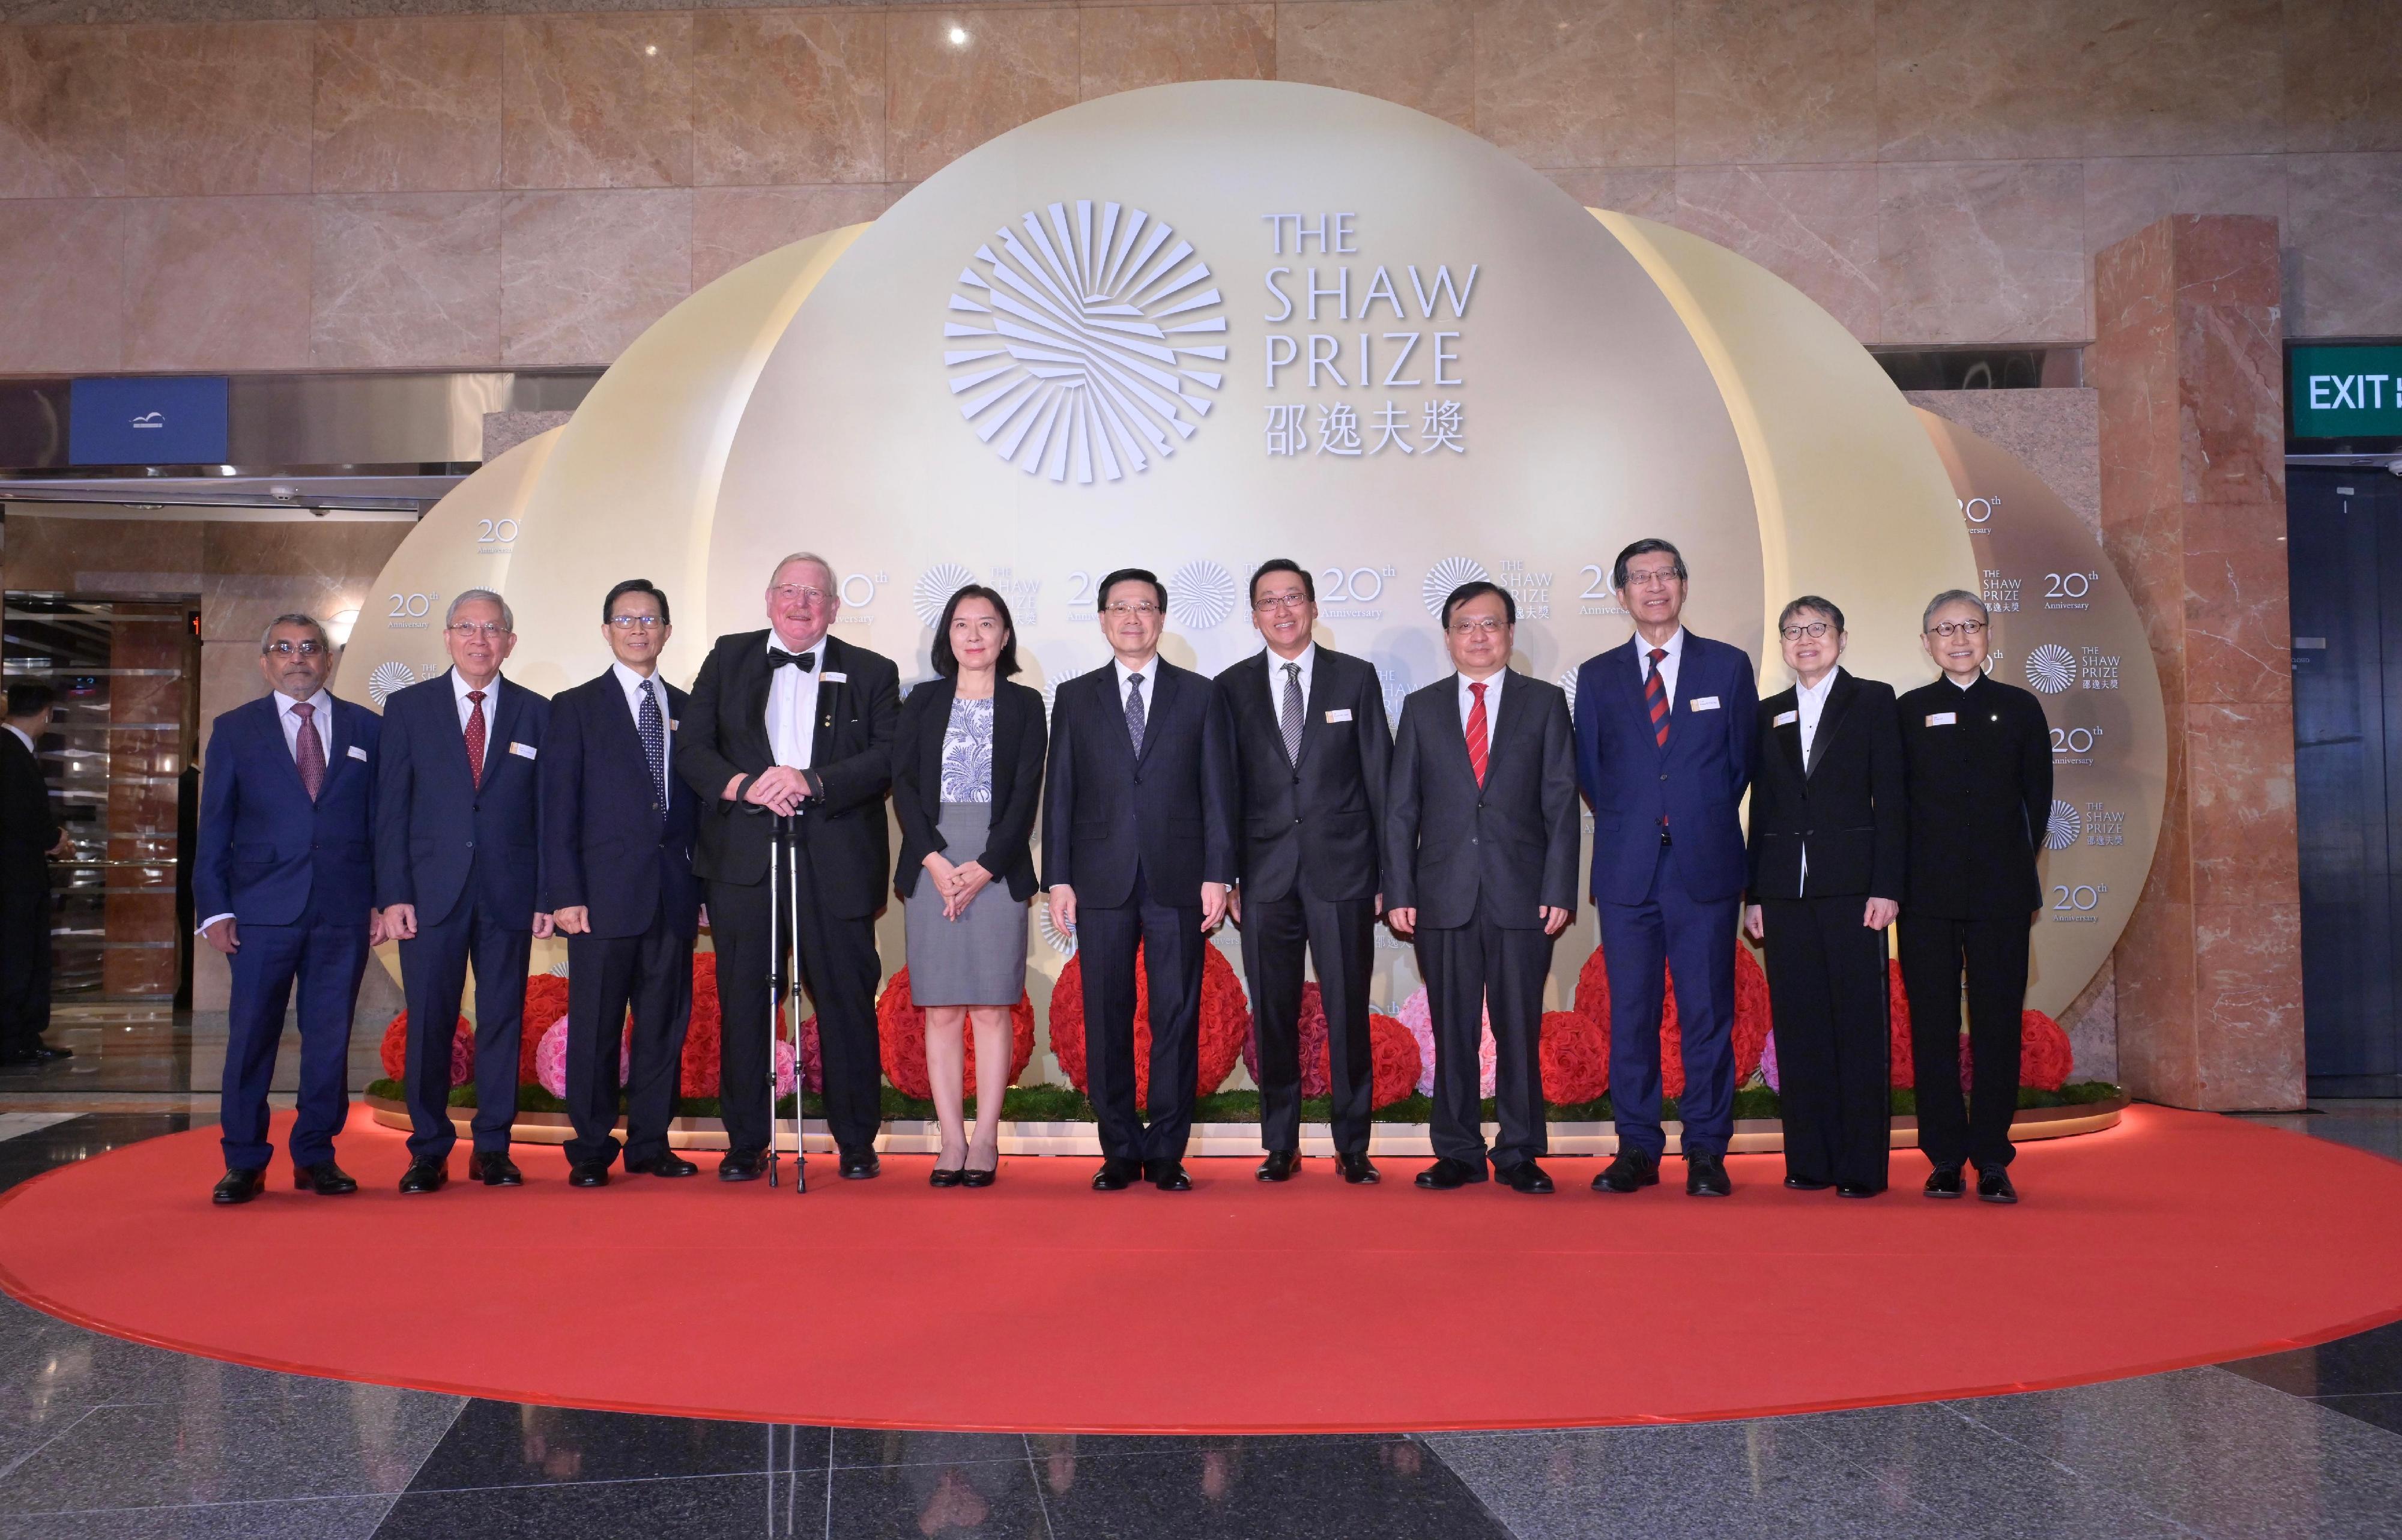 The Chief Executive, Mr John Lee, attended the Shaw Prize 2023 Award Presentation Ceremony this evening (November 12). Photo shows (from fourth left) the Chair of the Board of Adjudicators of the Shaw Prize, Professor Reinhard Genzel; Deputy Director of the Liaison Office of the Central People's Government in the Hong Kong Special Administrative Region (HKSAR) Ms Lu Xinning; Mr Lee; the Chair of the Shaw Prize Foundation, Dr Raymond Chan; Deputy Commissioner of the Office of the Commissioner of the Ministry of Foreign Affairs of the People's Republic of China in the HKSAR Mr Fang Jianming; the Chair of the Shaw Prize Council, Professor Kenneth Young, and other guests at the ceremony.